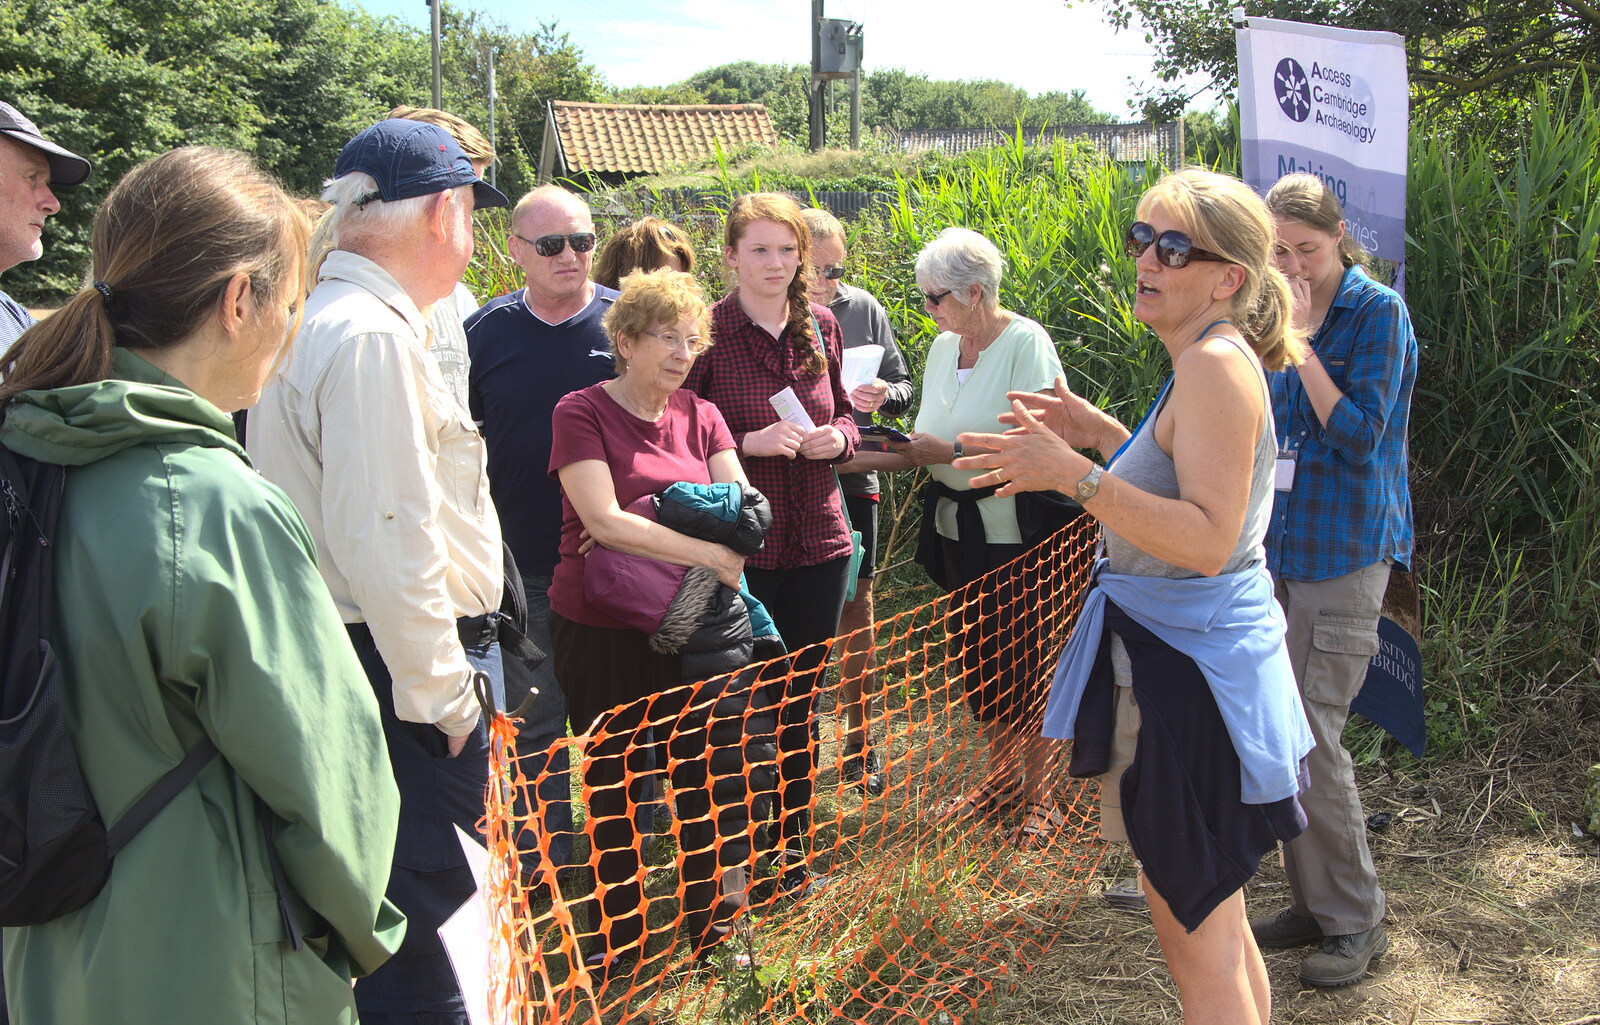 Carenza Lewis explains the history of Dunwich from The Archaeology of Dunwich: A Camping Trip, Dunwich, Suffolk - 1st August 2015